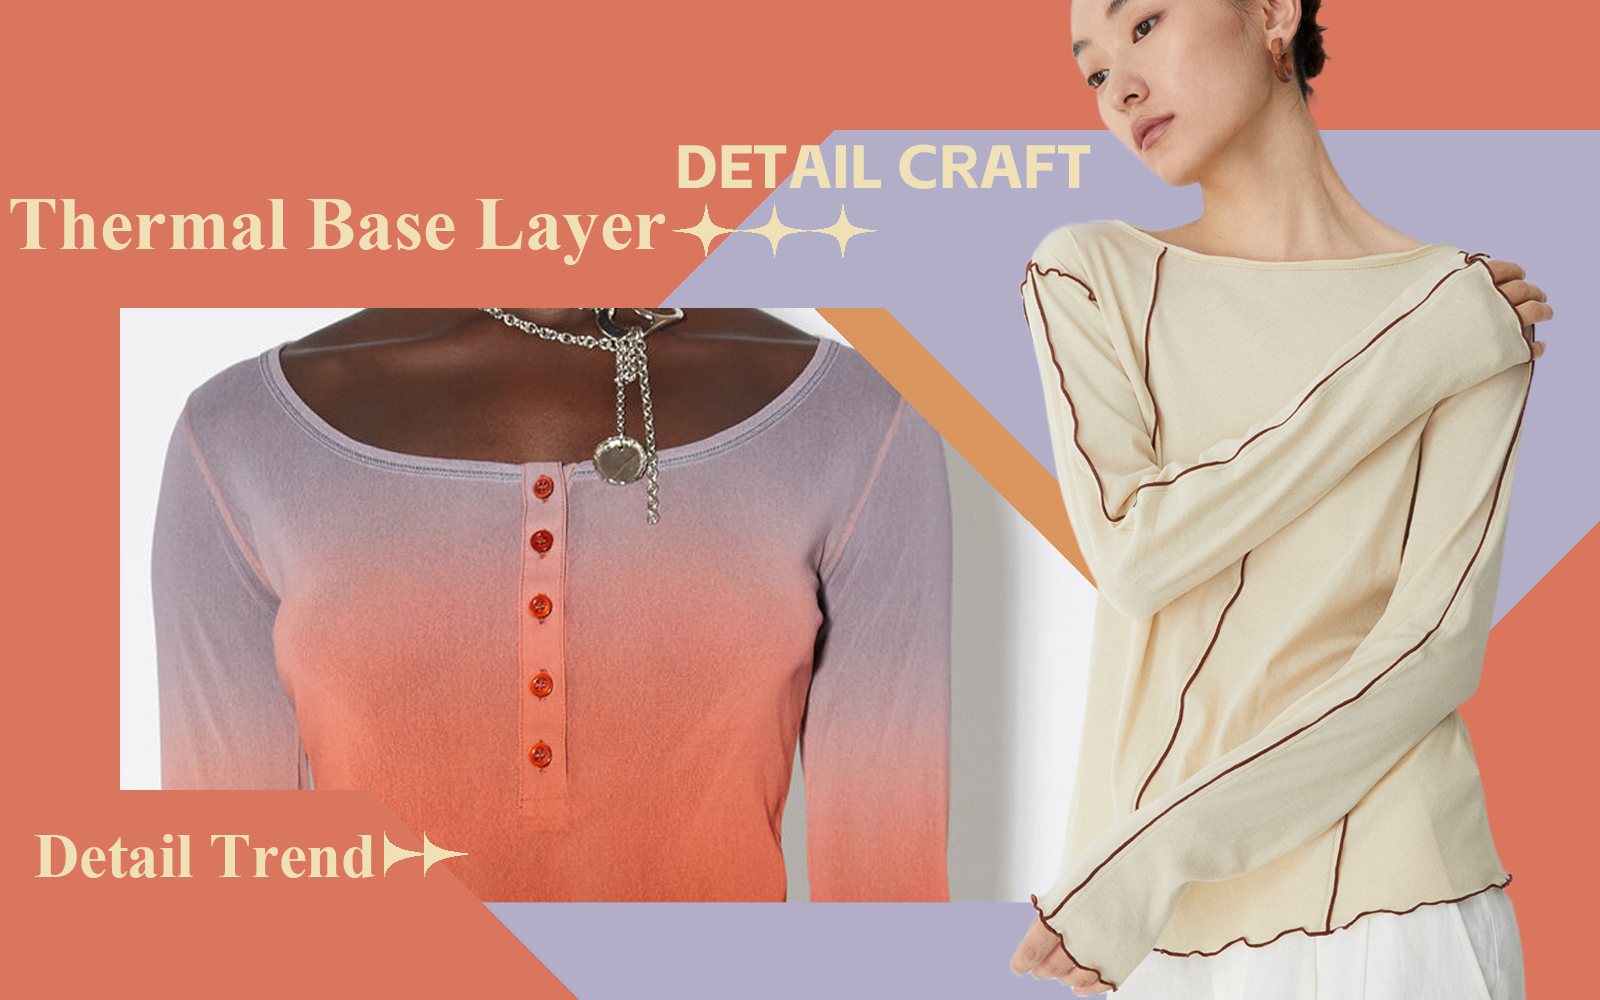 The Detail & Craft Trend for Thermal Base Layer